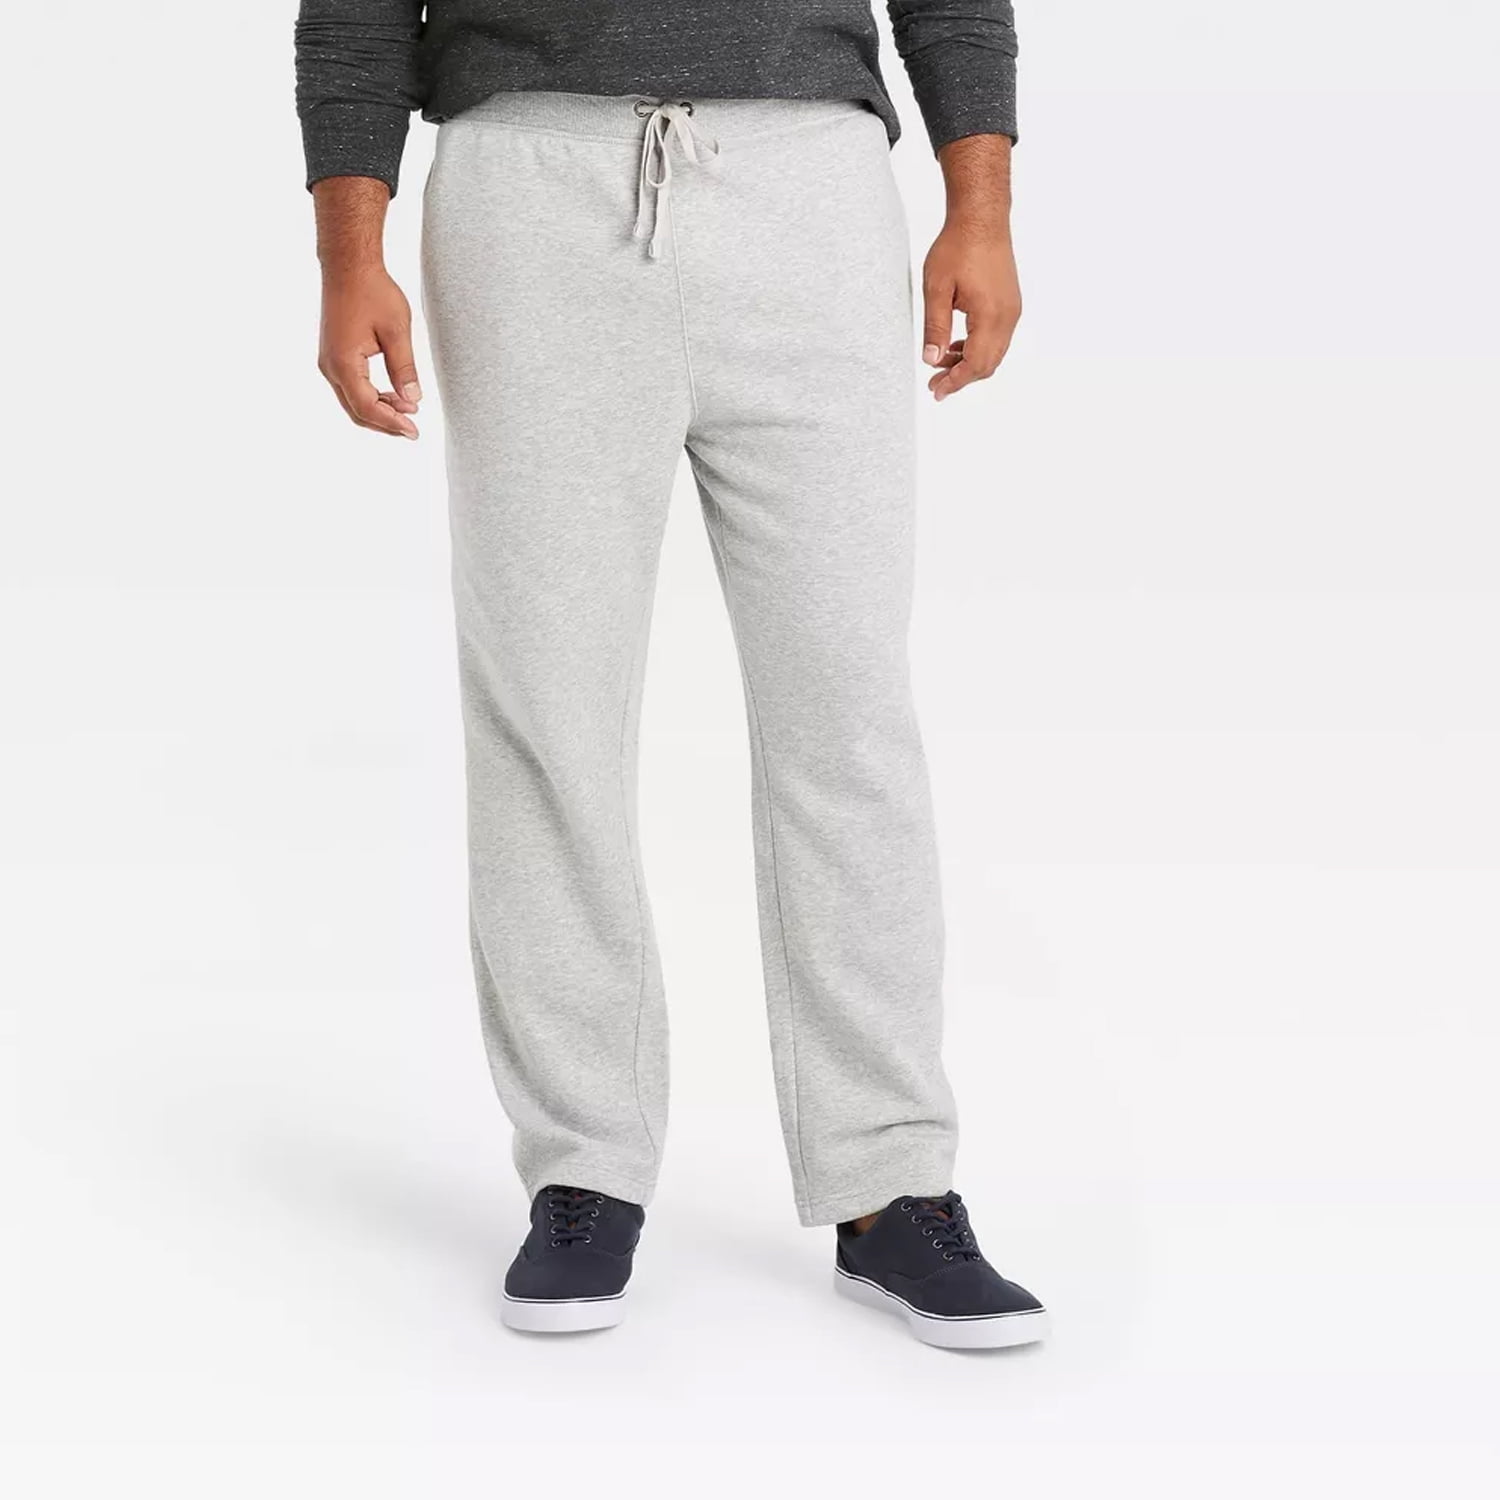 Men's Standard Fit Tapered Jogger Pants - Goodfellow & Co